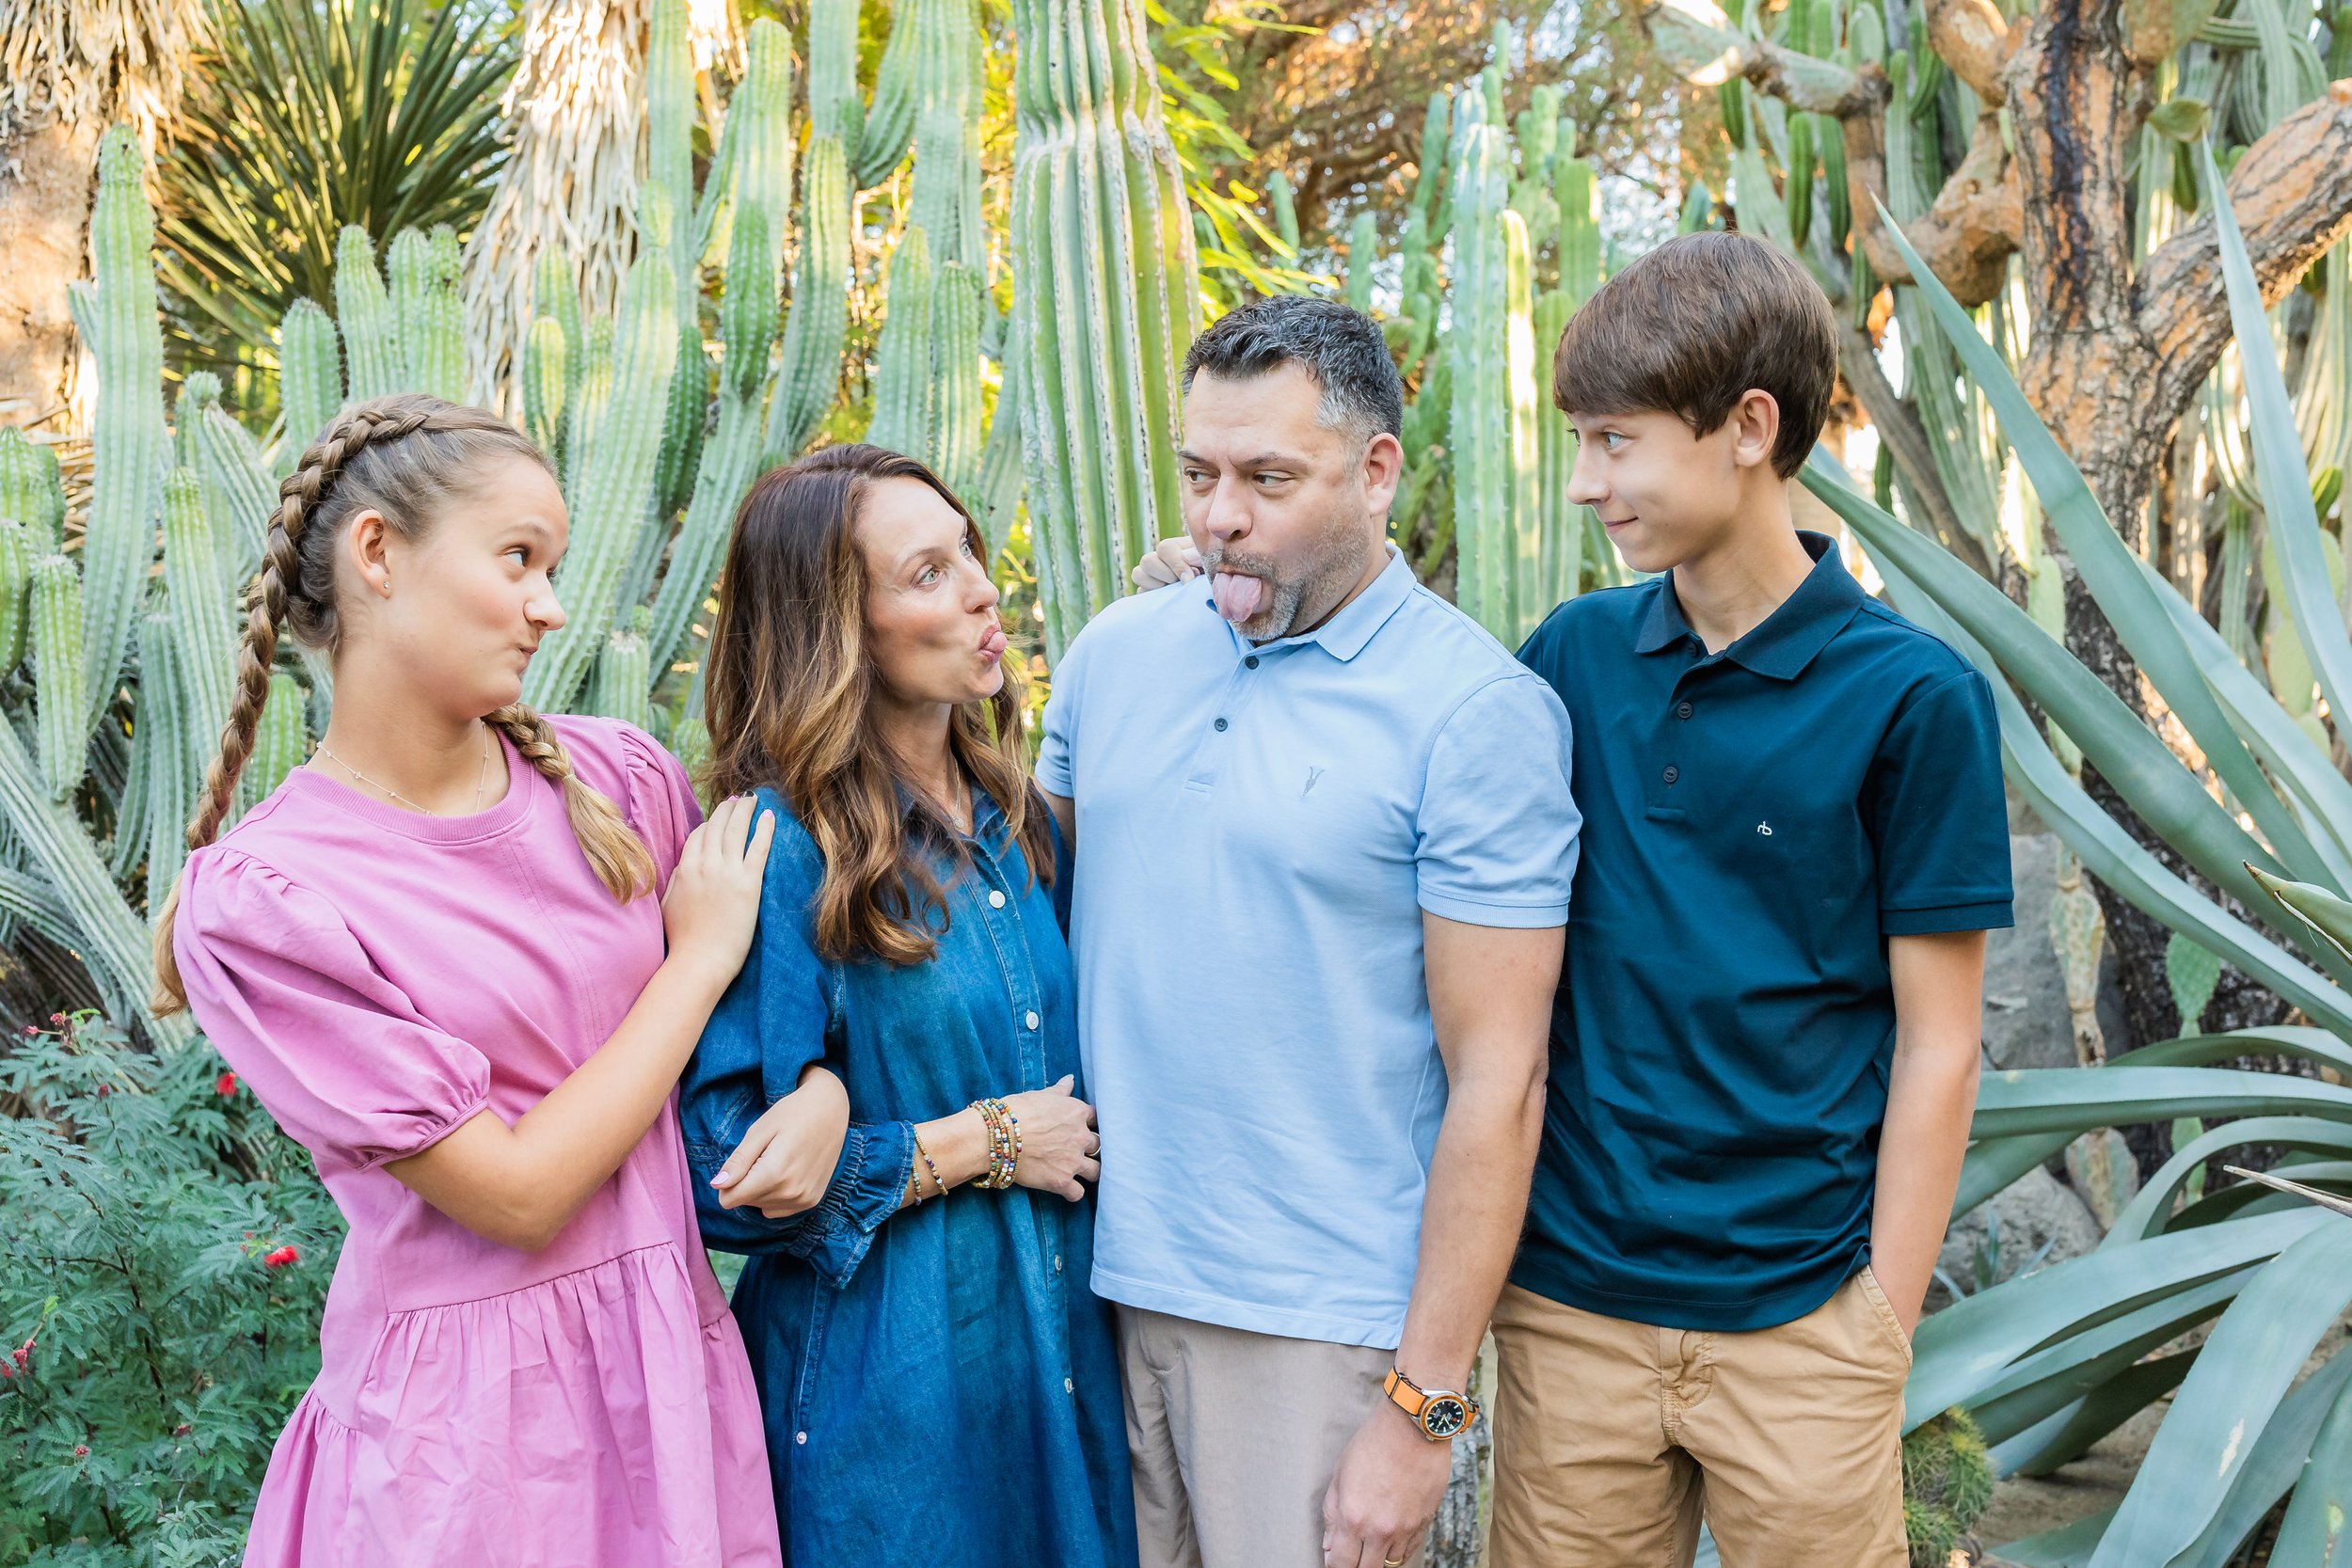 Mortons-family-photos-2021-palm-springs-california-monocle-project-99.jpg